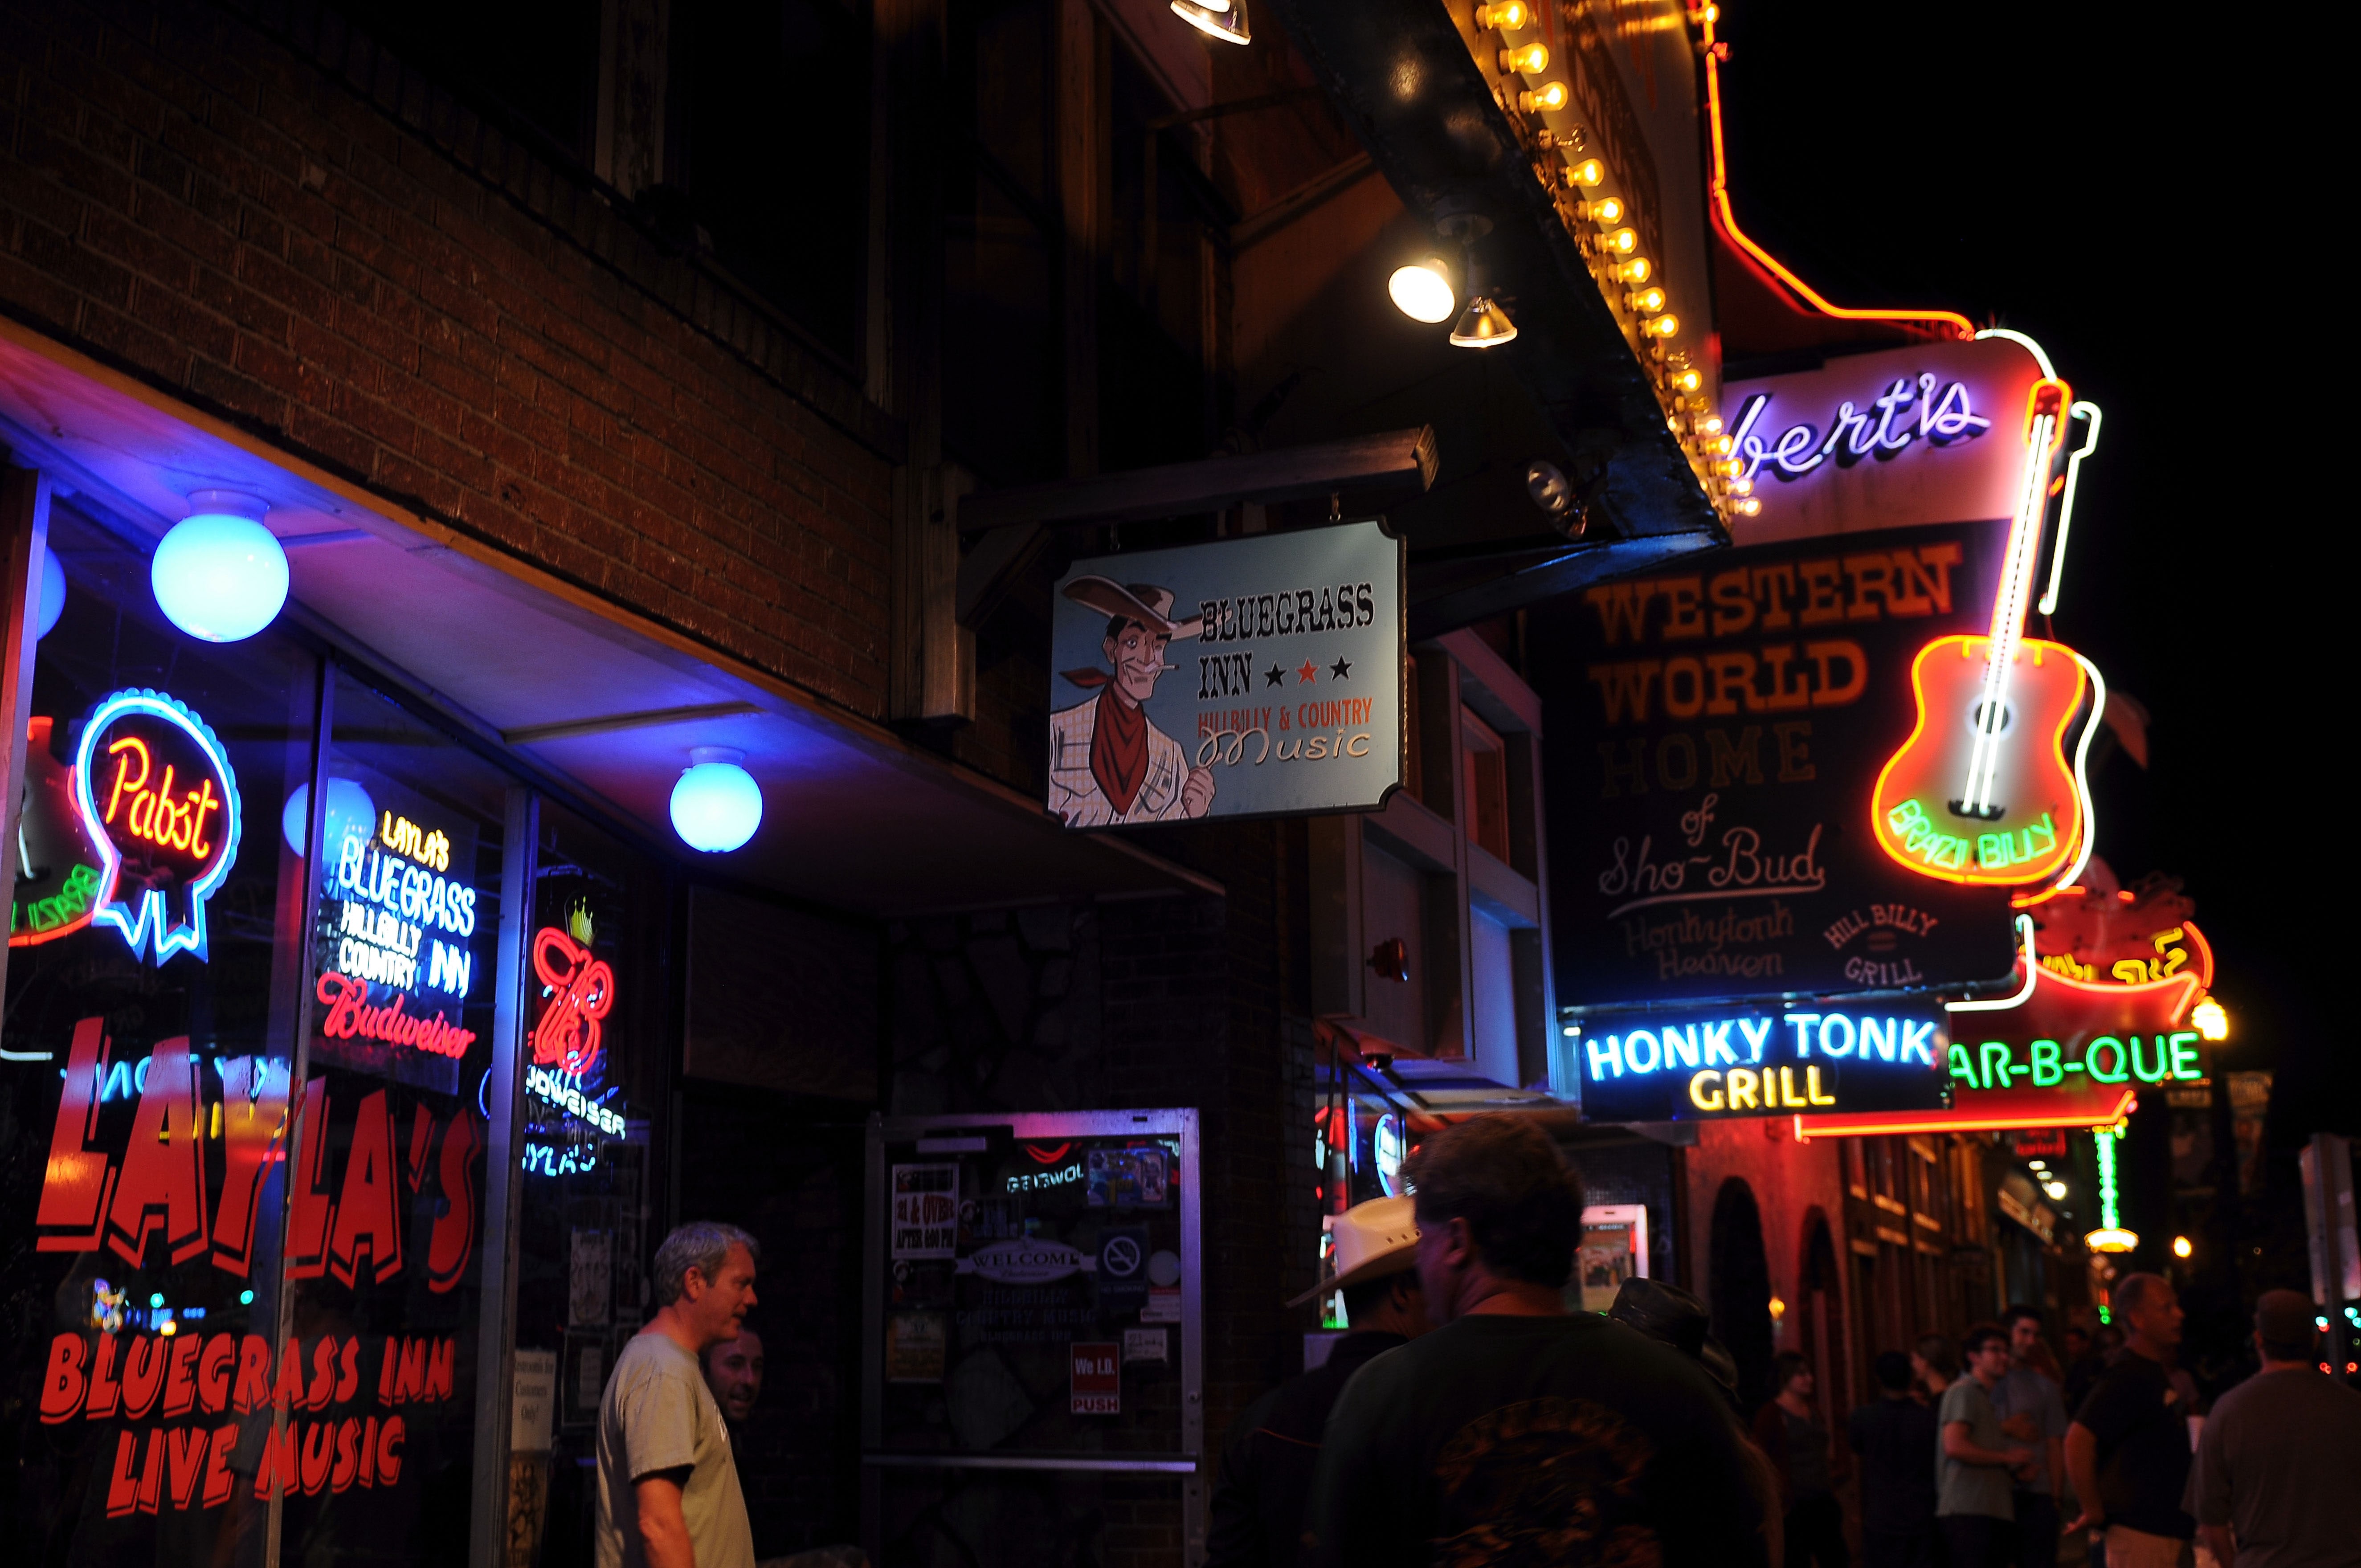 Honky Tonk area of Nashville music city, Tennessee, United States of America, North America